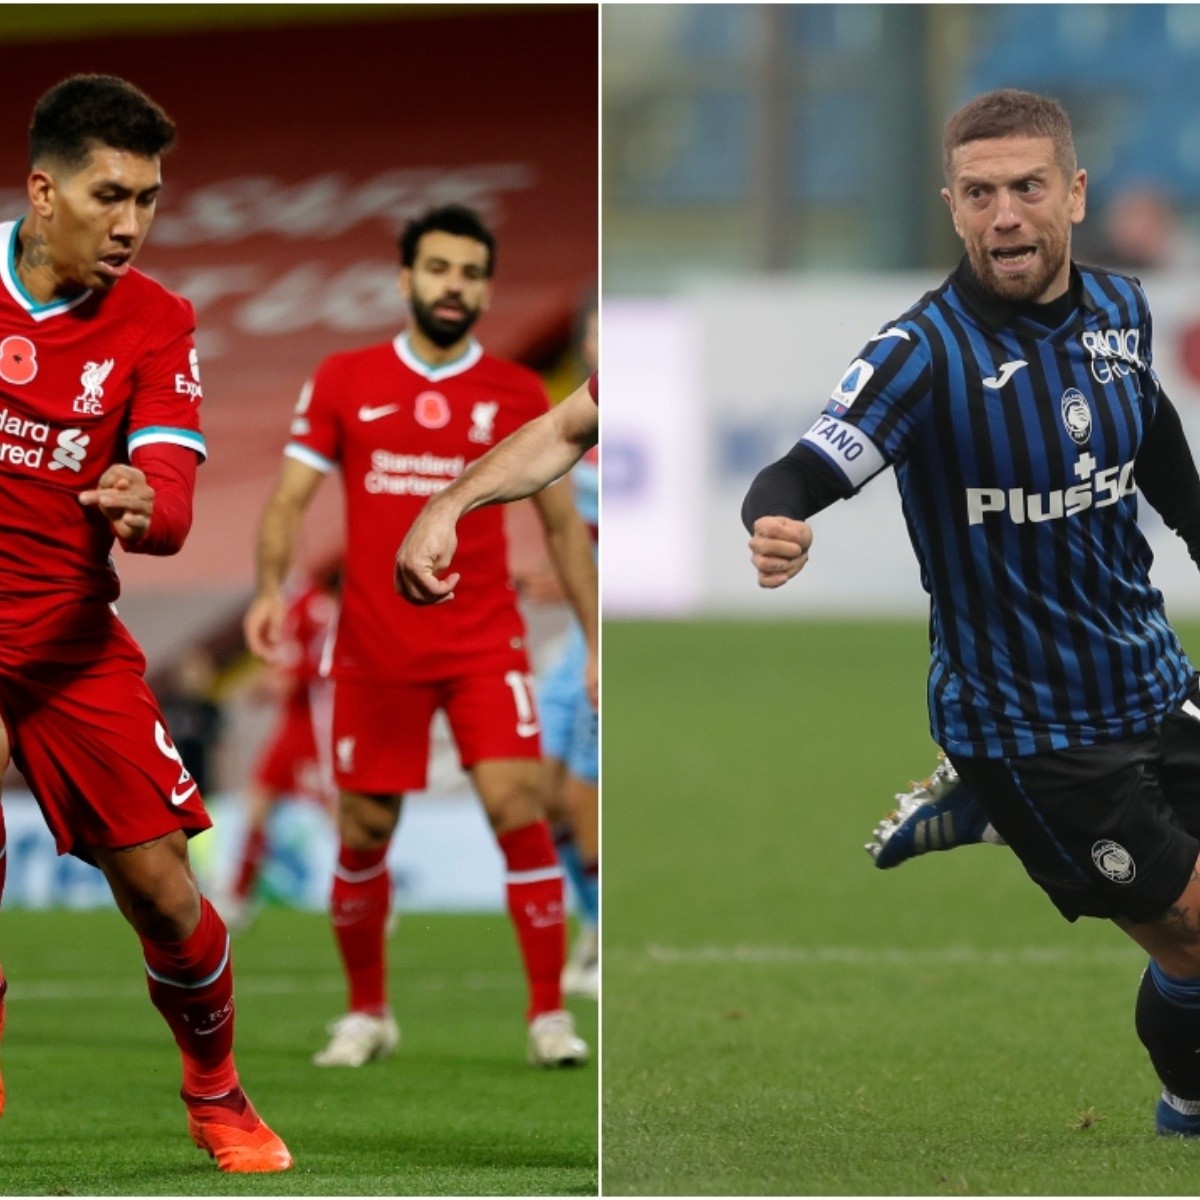 uefa champions league 2020 21 atalanta vs liverpool today how to watch or live stream online free in the us today predictions odds and preview of ucl watch here bolavip us bolavip us